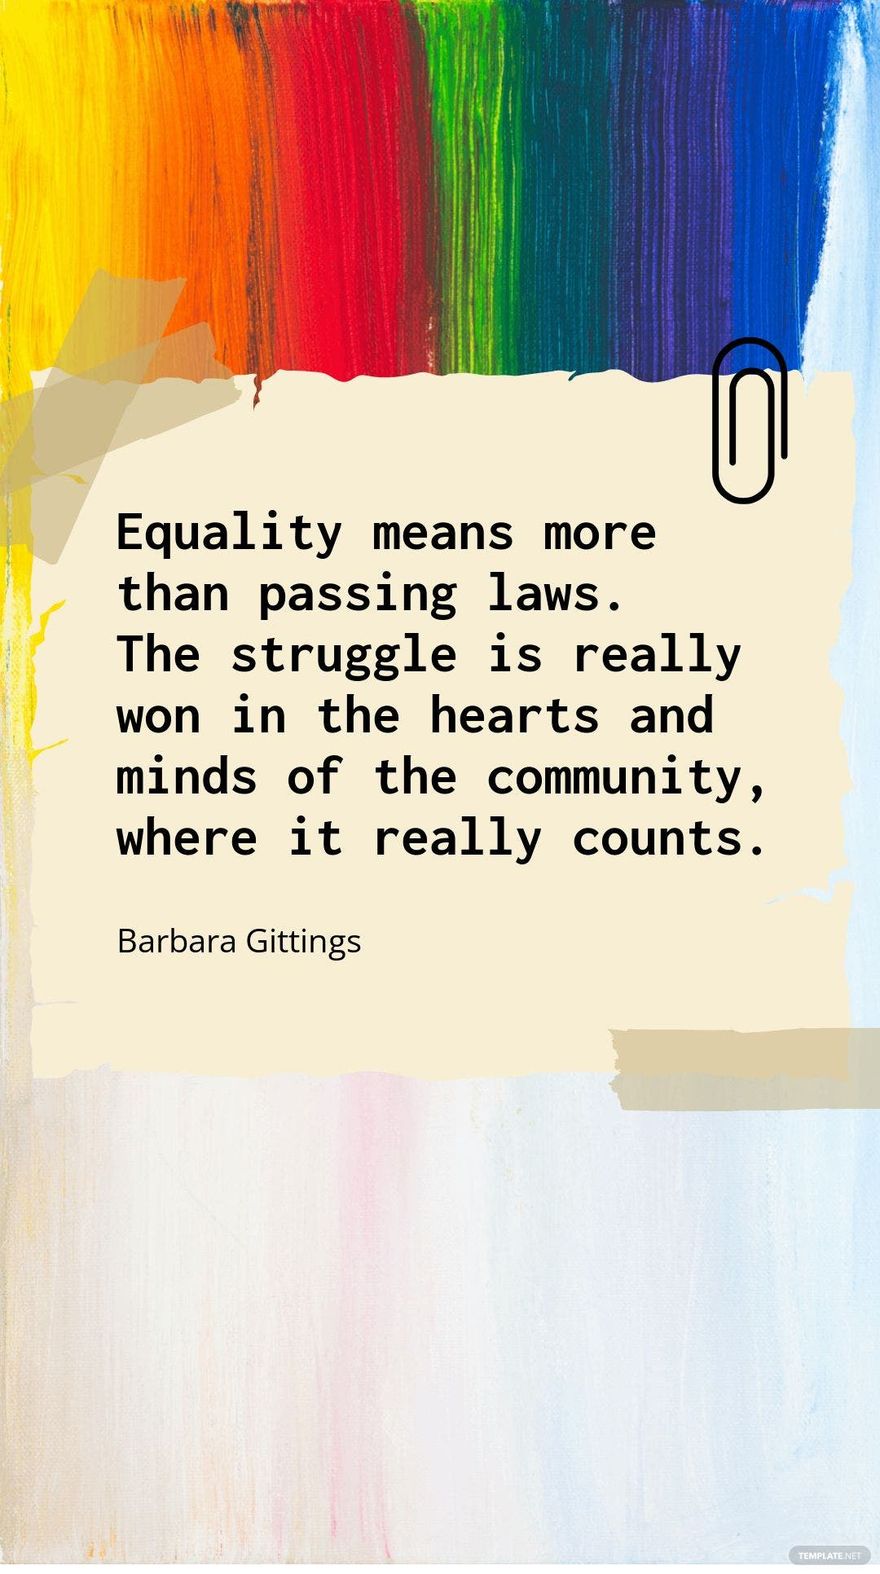 Barbara Gittings - Equality means more than passing laws. The struggle is really won in the hearts and minds of the community, where it really counts.